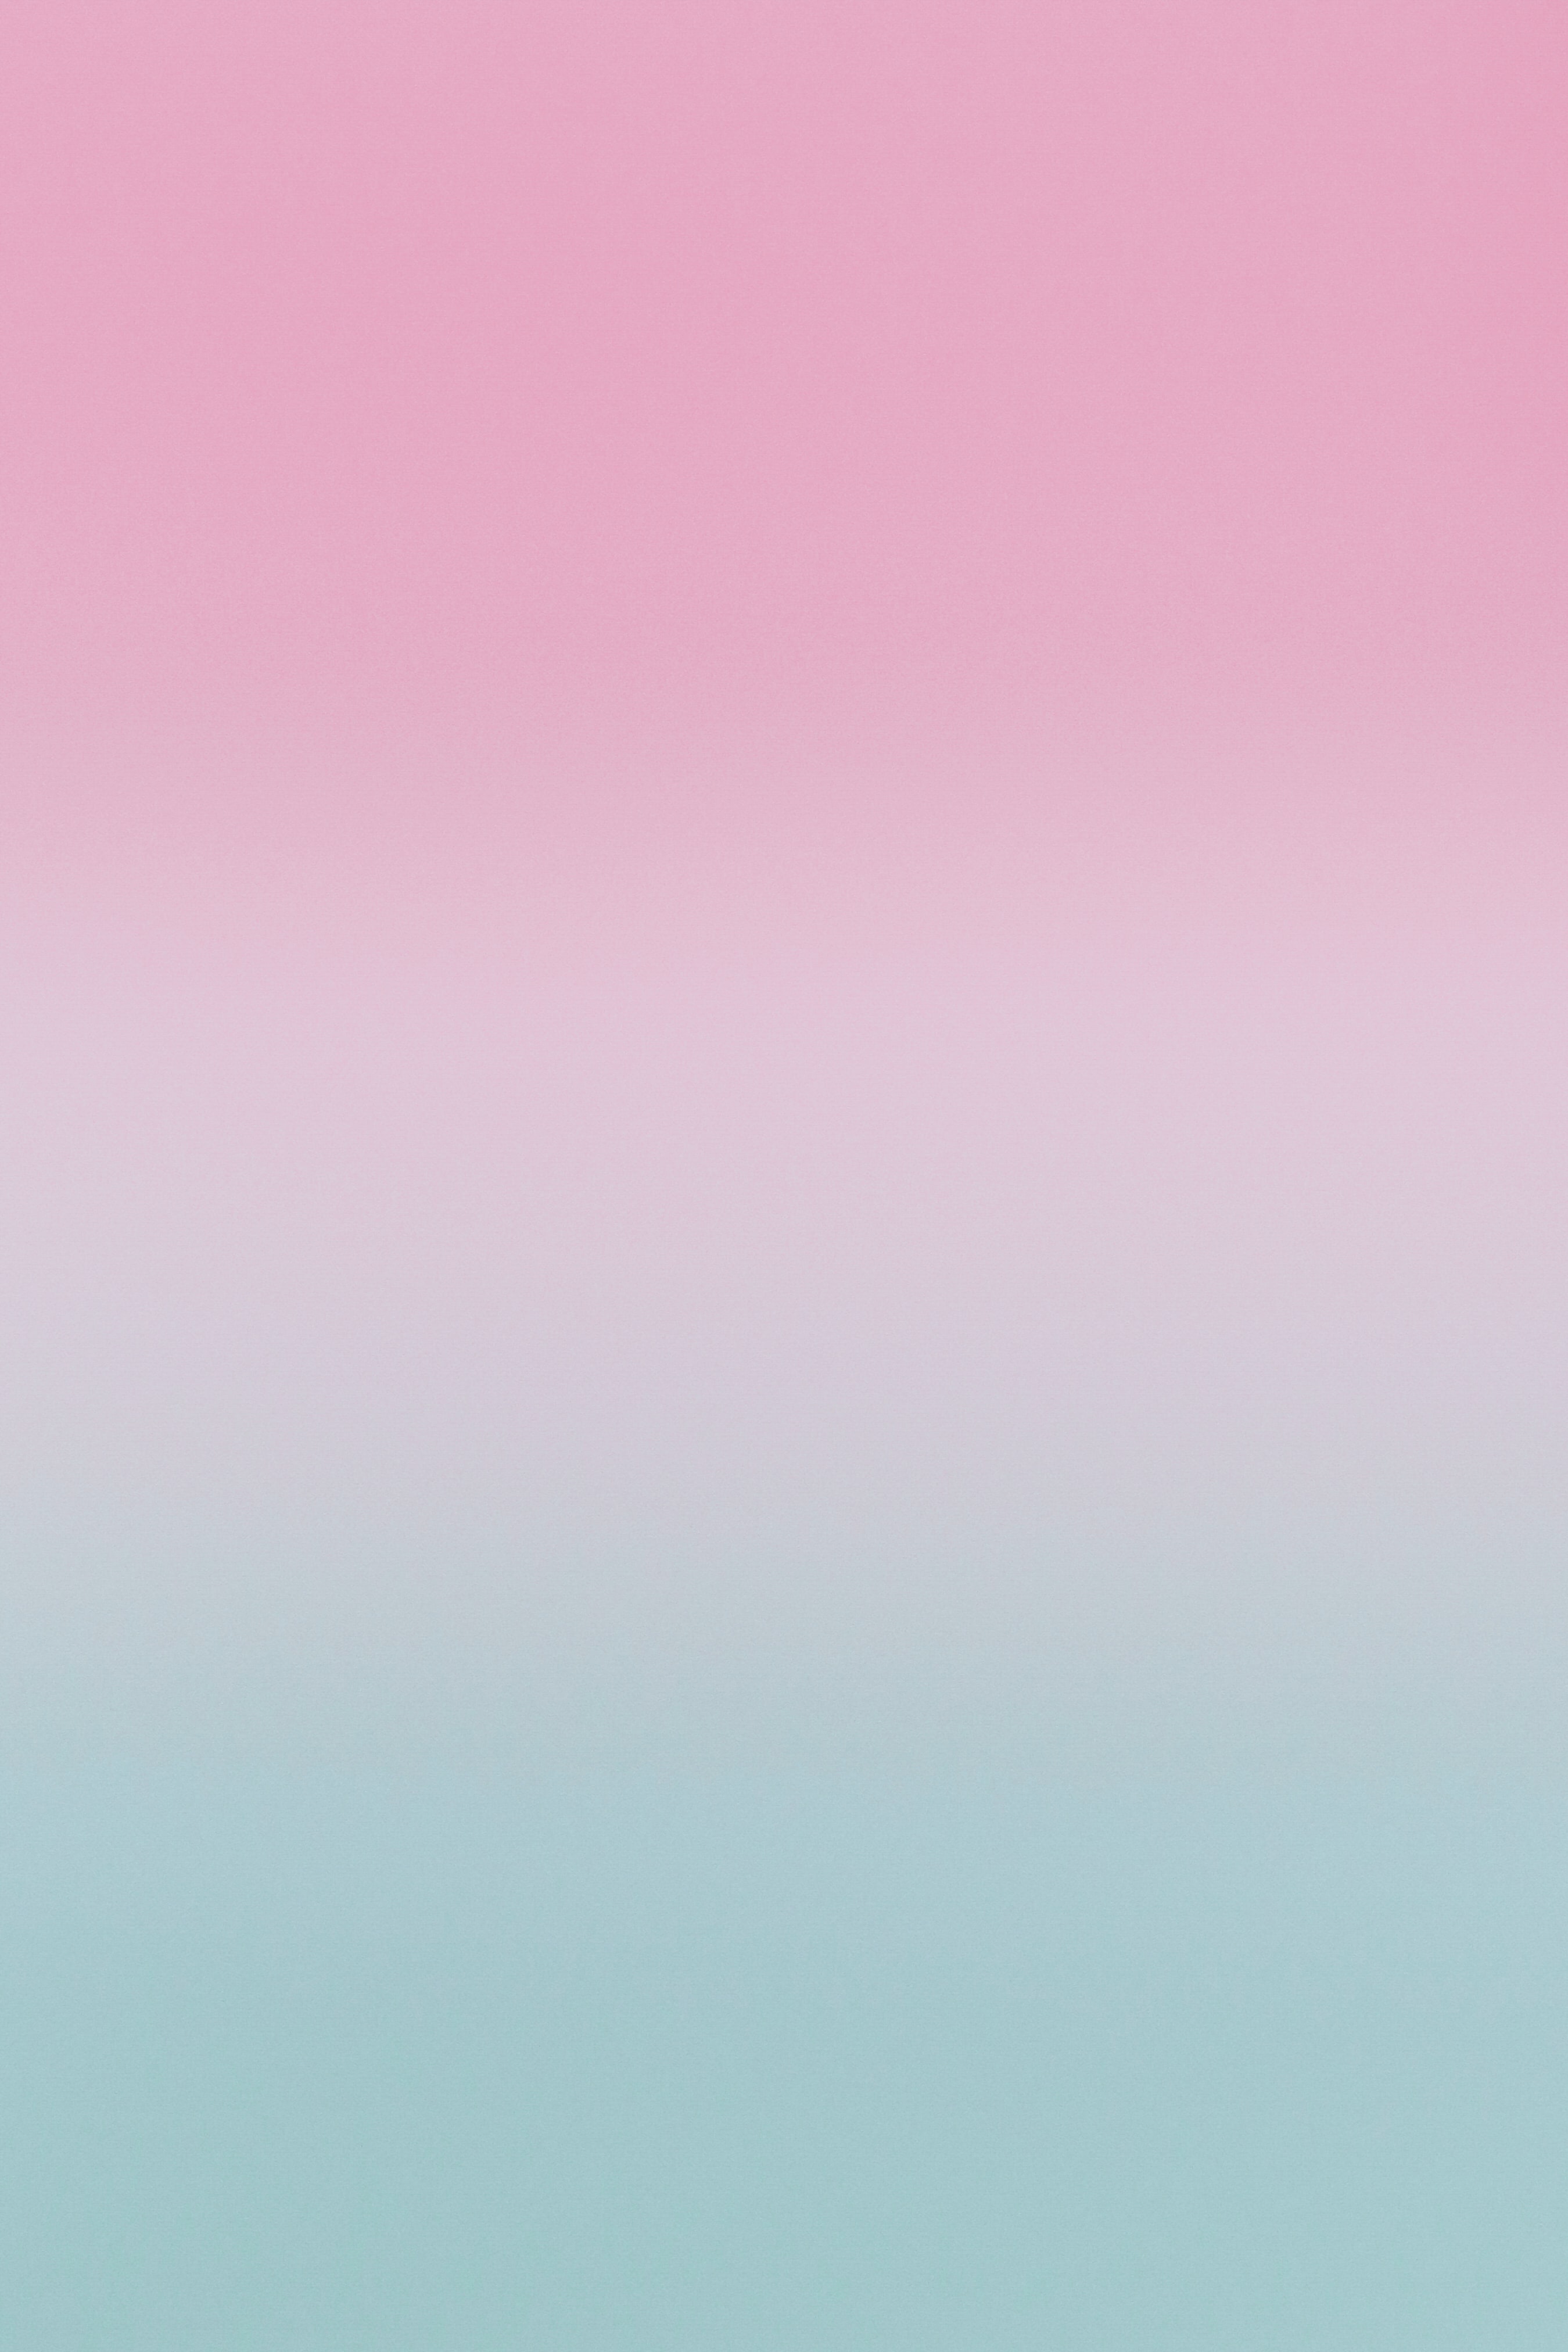 pink, blur, gradient, blue, abstract, smooth Aesthetic wallpaper